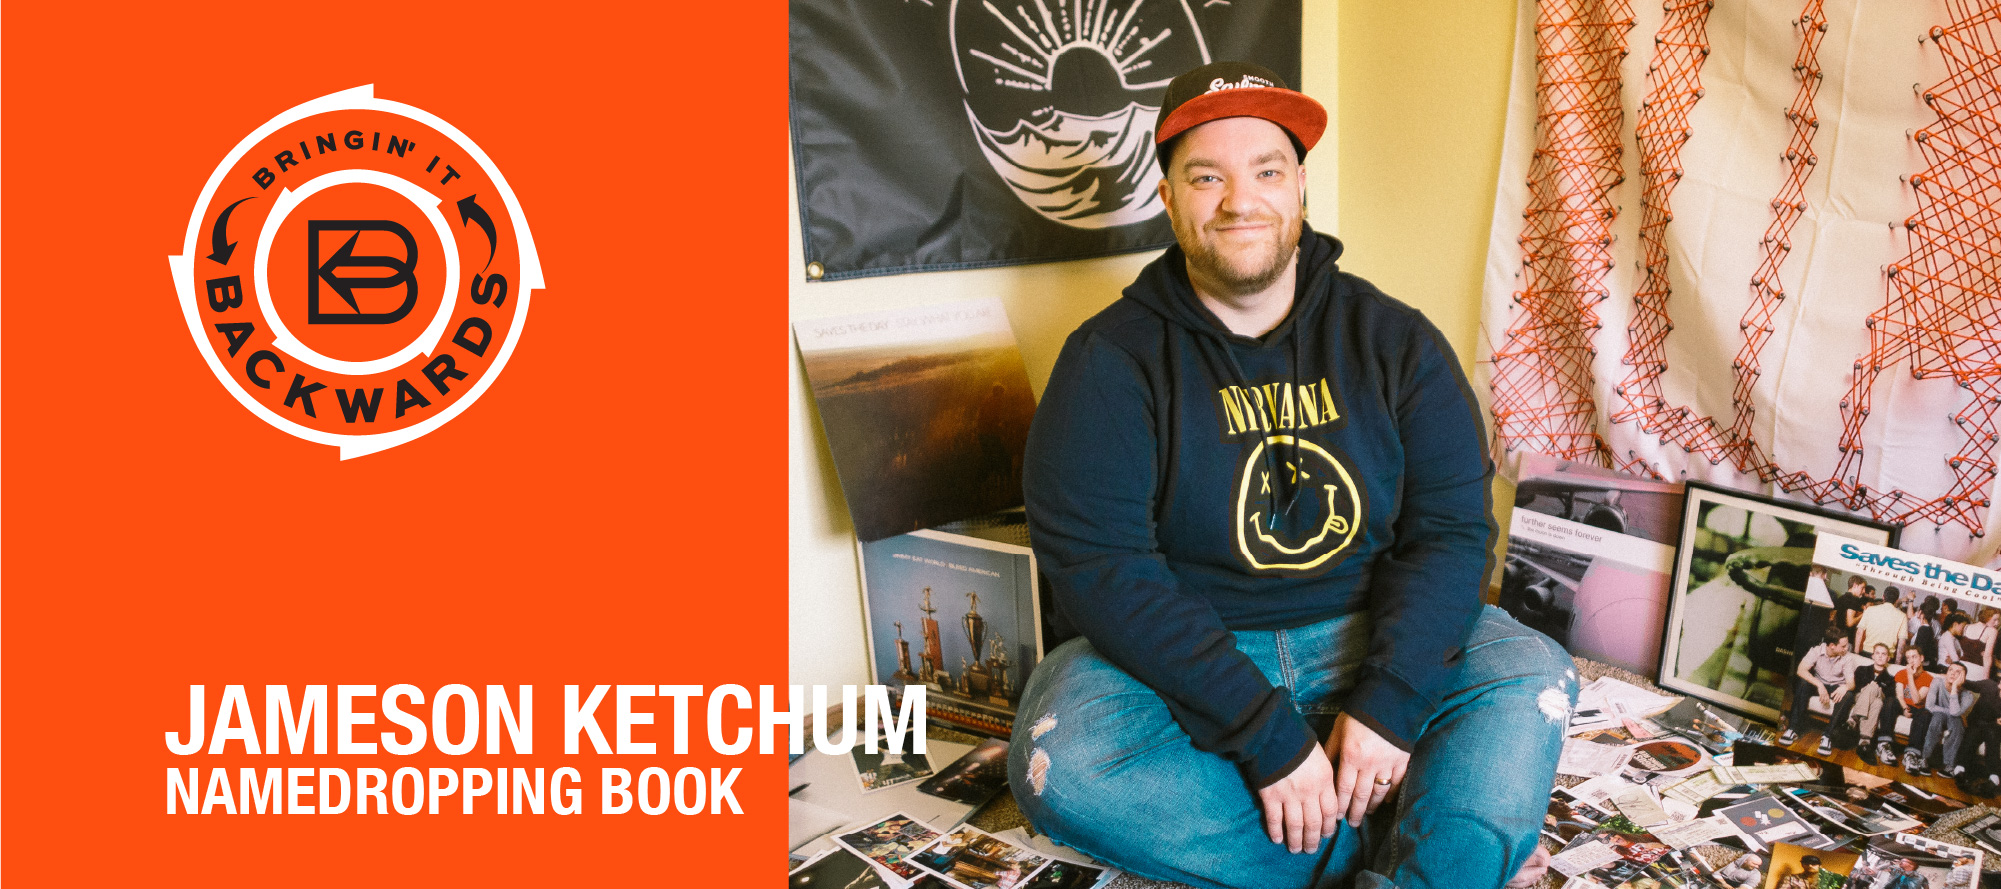 Bringin’ it Backwards: Interview with Jameson Ketchum Author of Namedropping Book